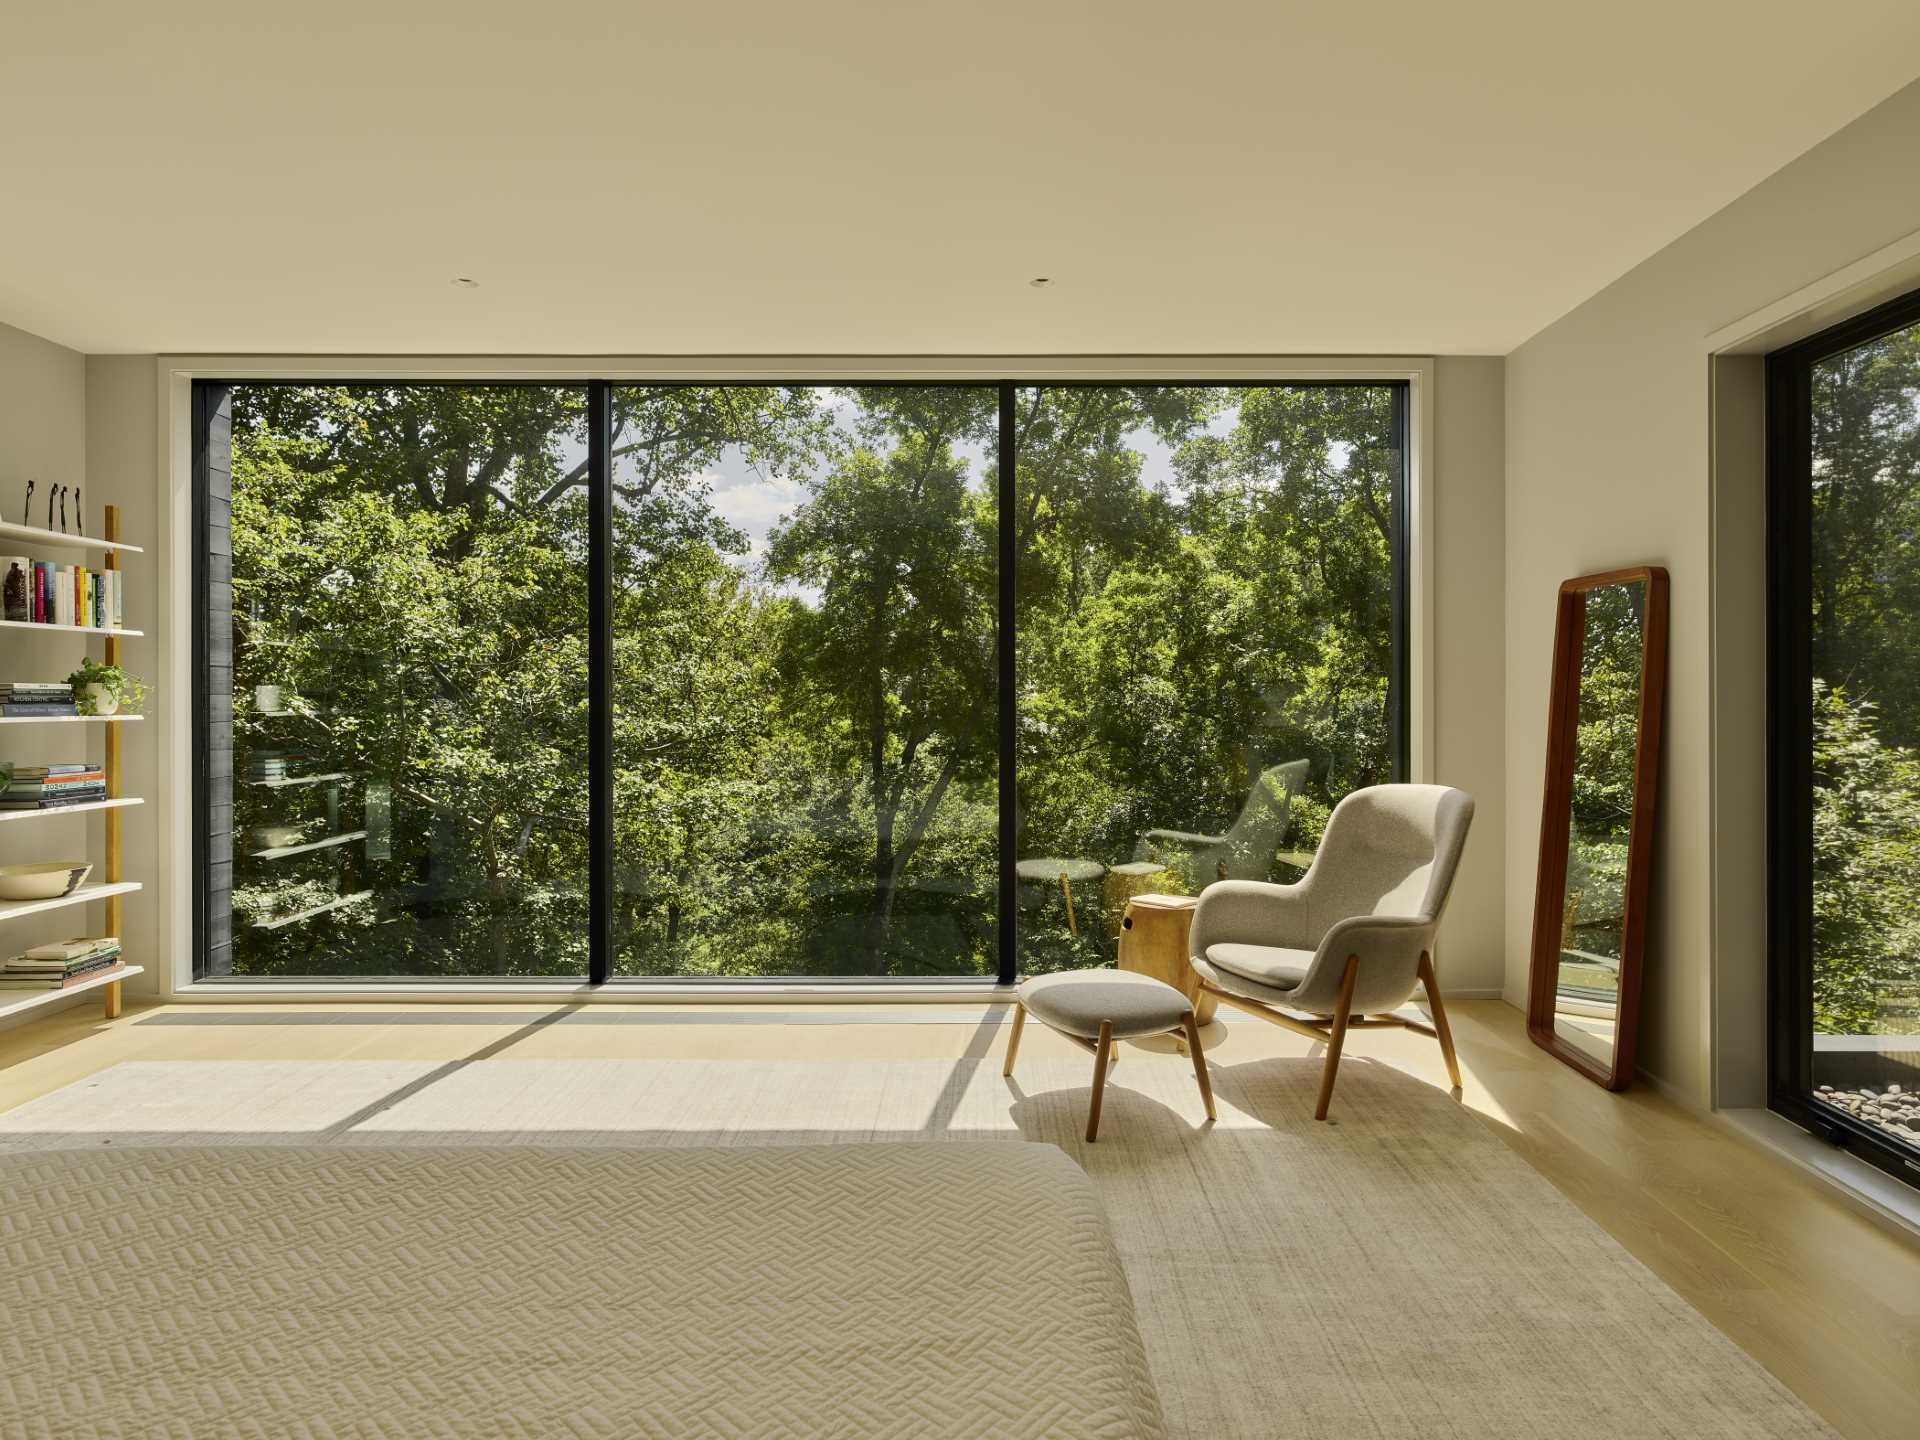 In this modern bedroom, floor to ceiling windows that provide an abundance of natural light and frame the tree views.